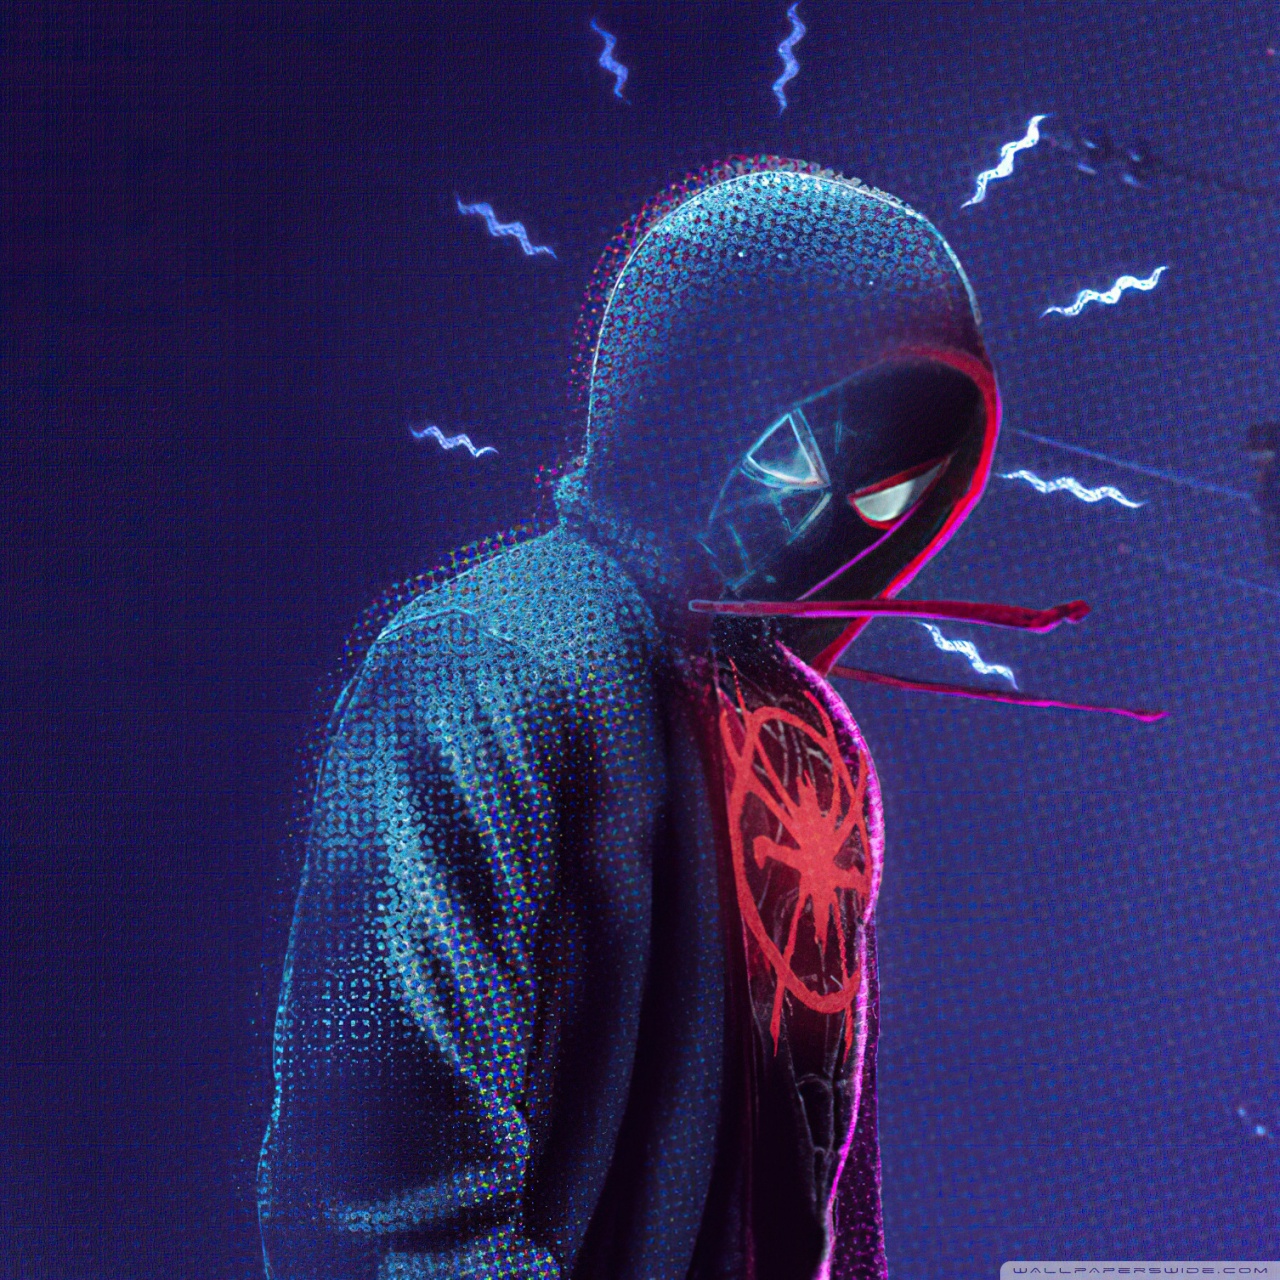 Miles Morales Wallpapers  Top 65 Best Spider Man Miles Morales Backgrounds